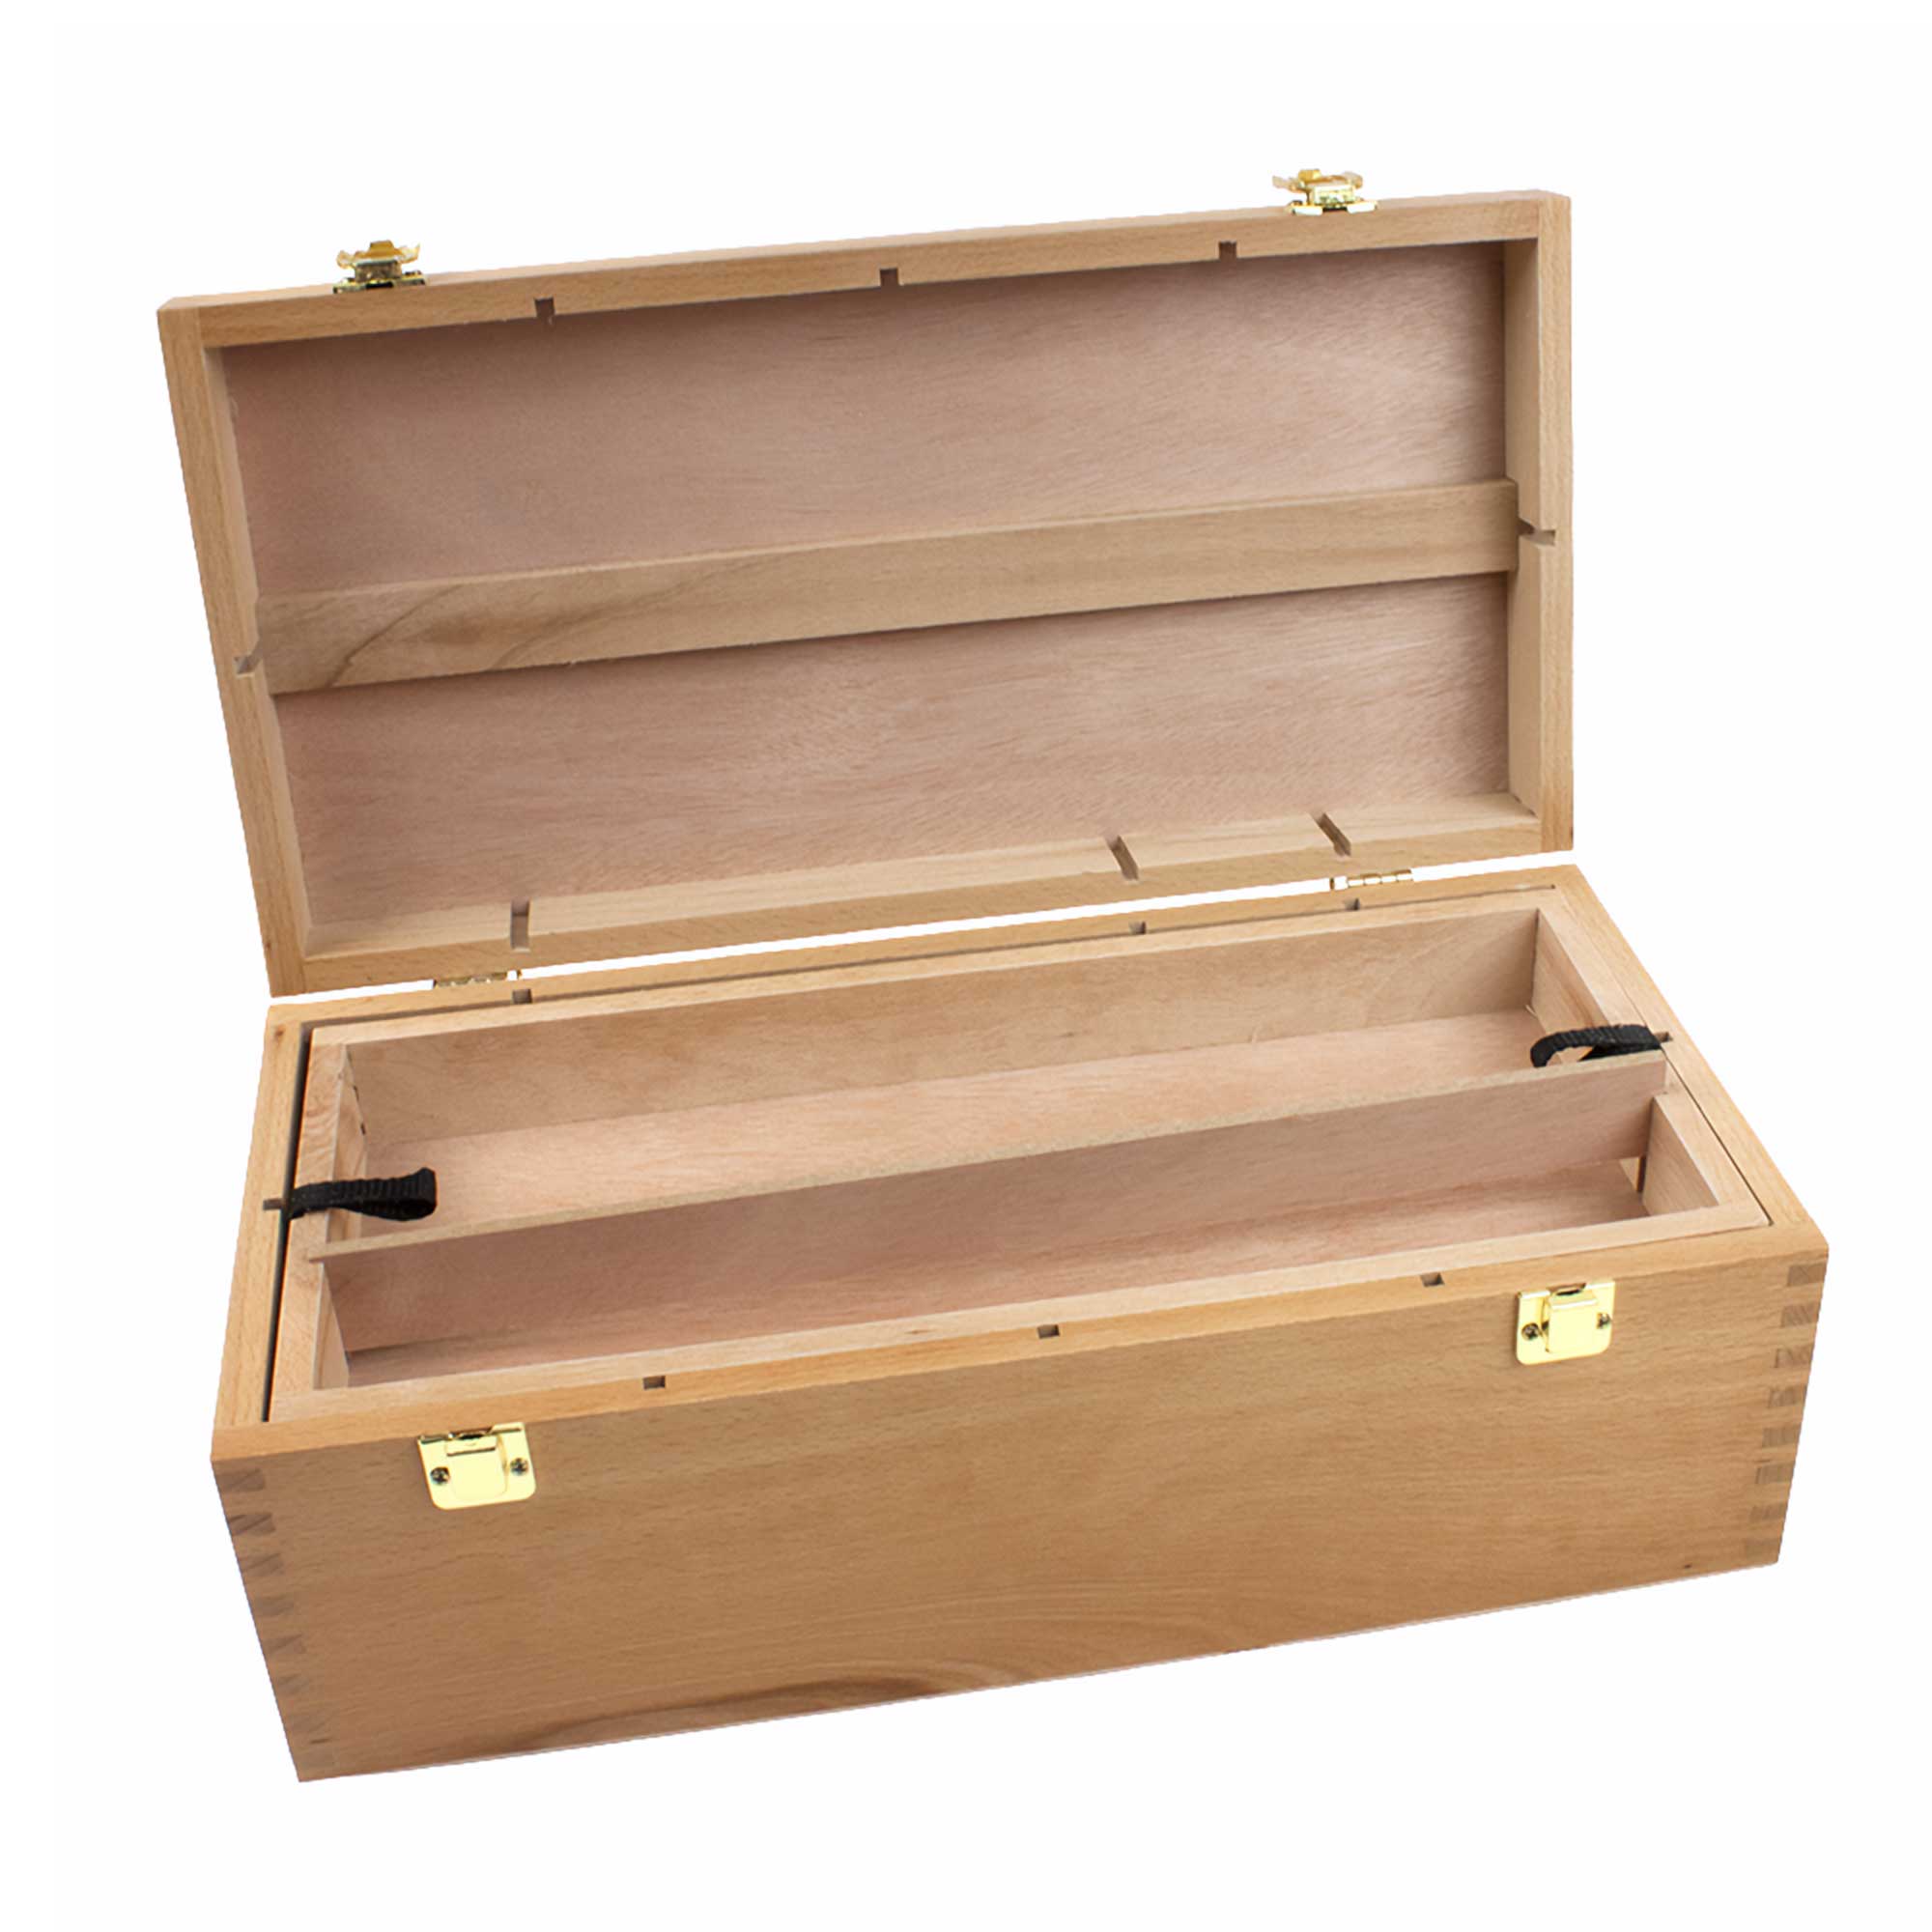 Loxley Howden Artists Storage Chest - Single Box